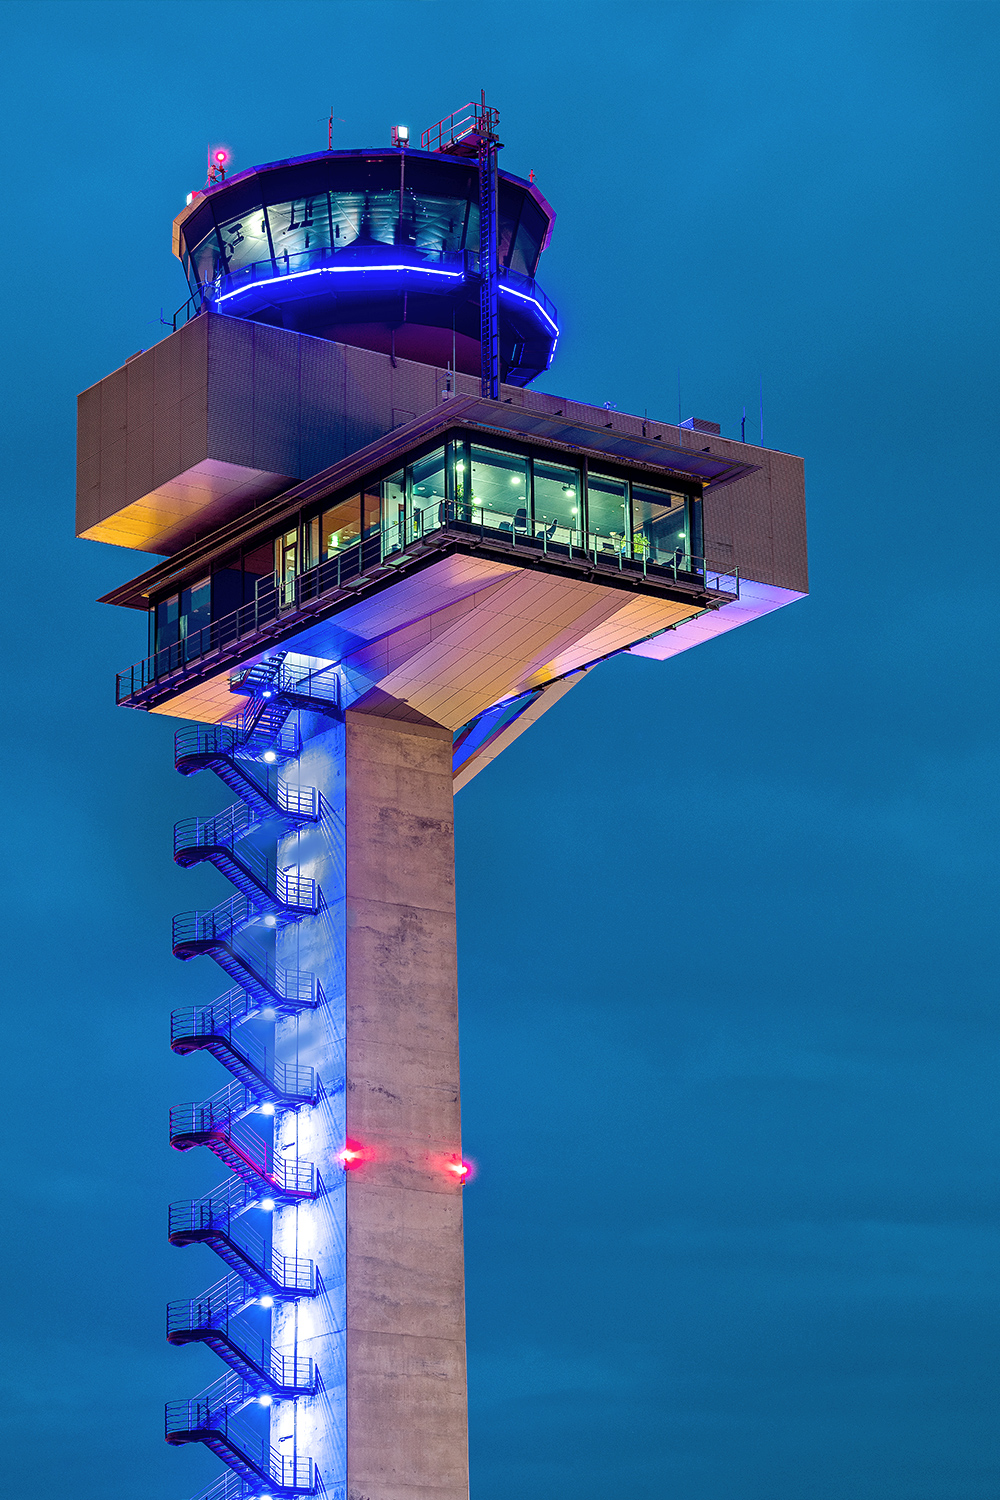 Tower to observe aircrafts at BER